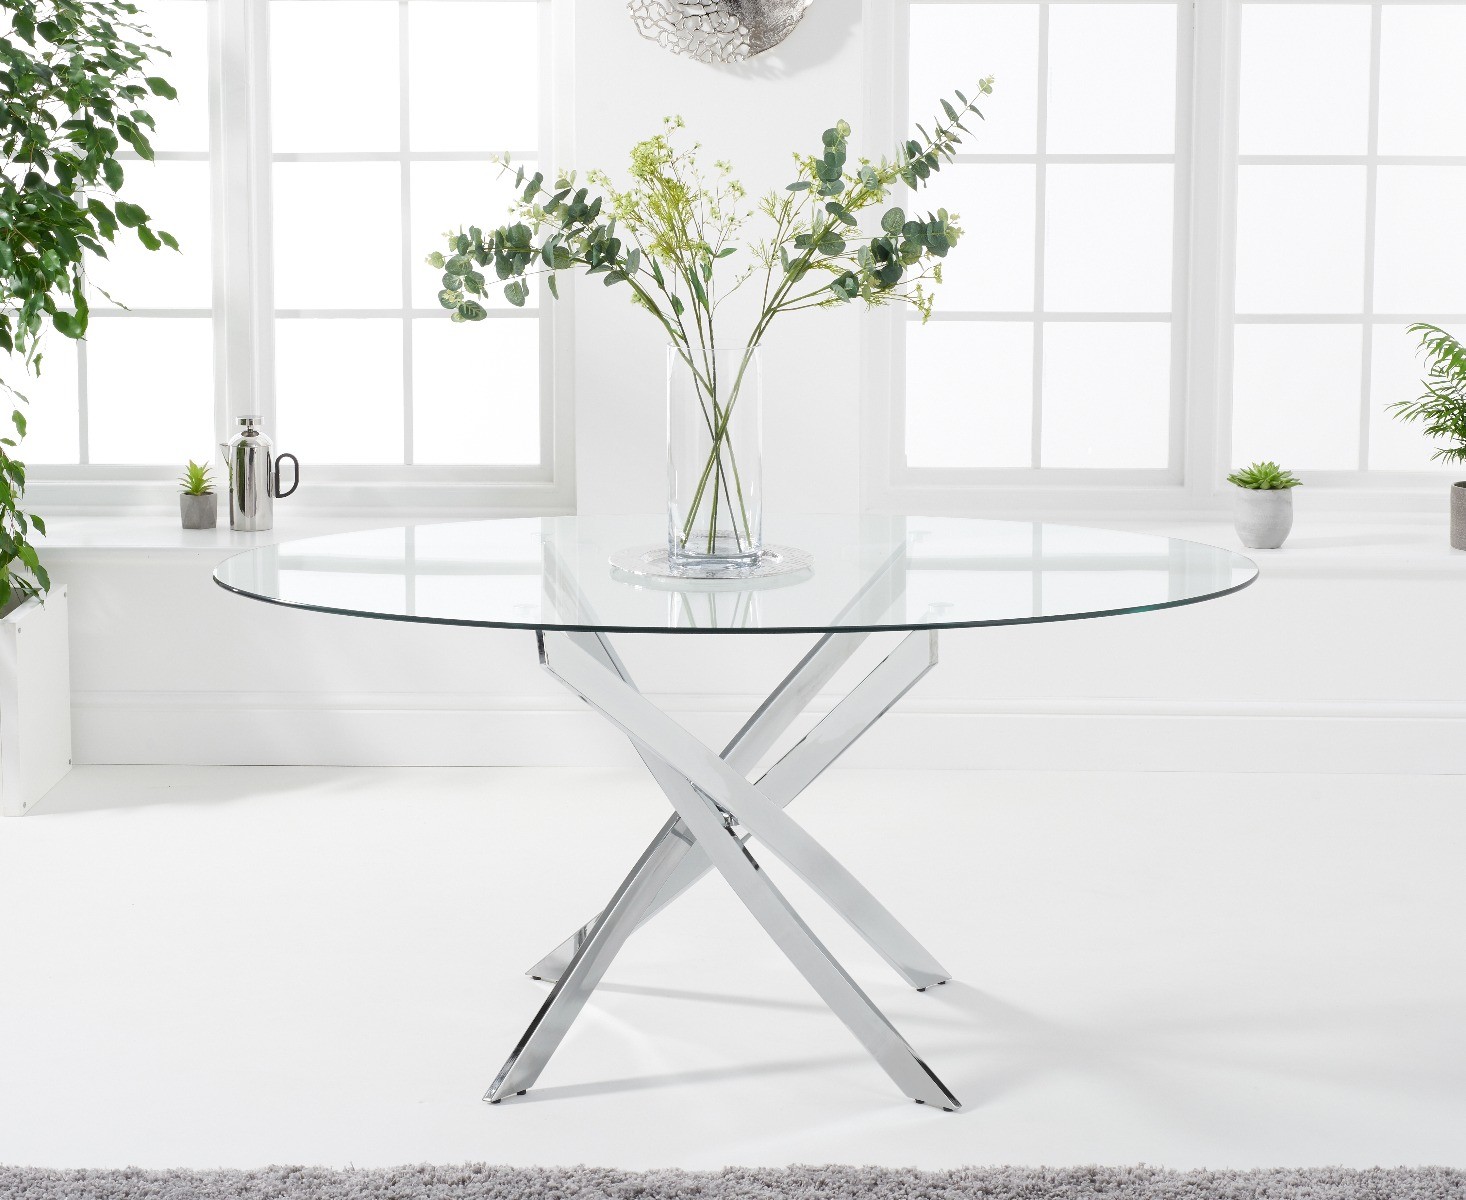 Photo 3 of Bernini 165cm oval glass dining table with 8 grey angelo chairs